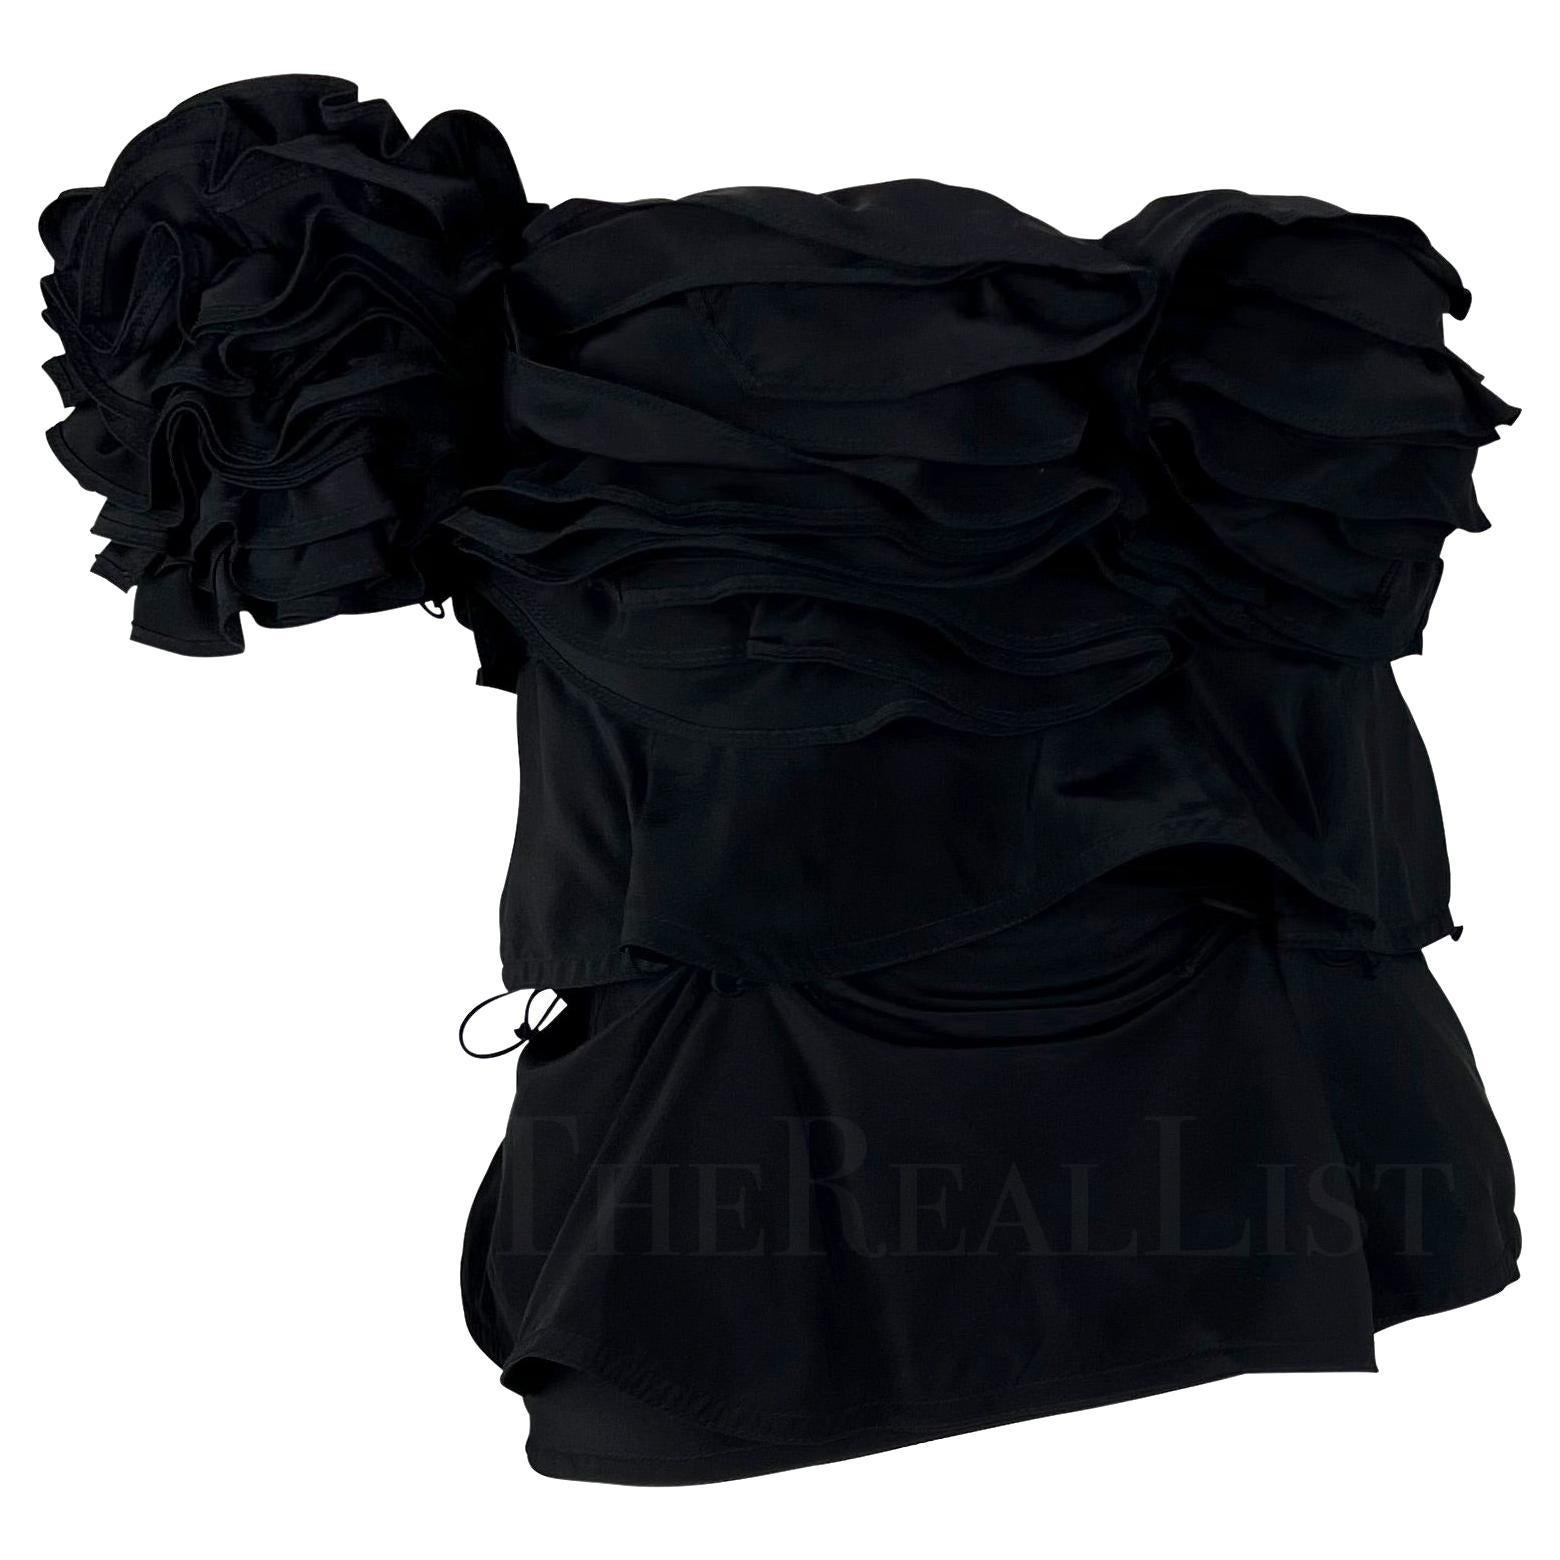 NWT F/W 2003 Yves Saint Laurent by Tom Ford Black Silk Ruffle Strapless Top For Sale